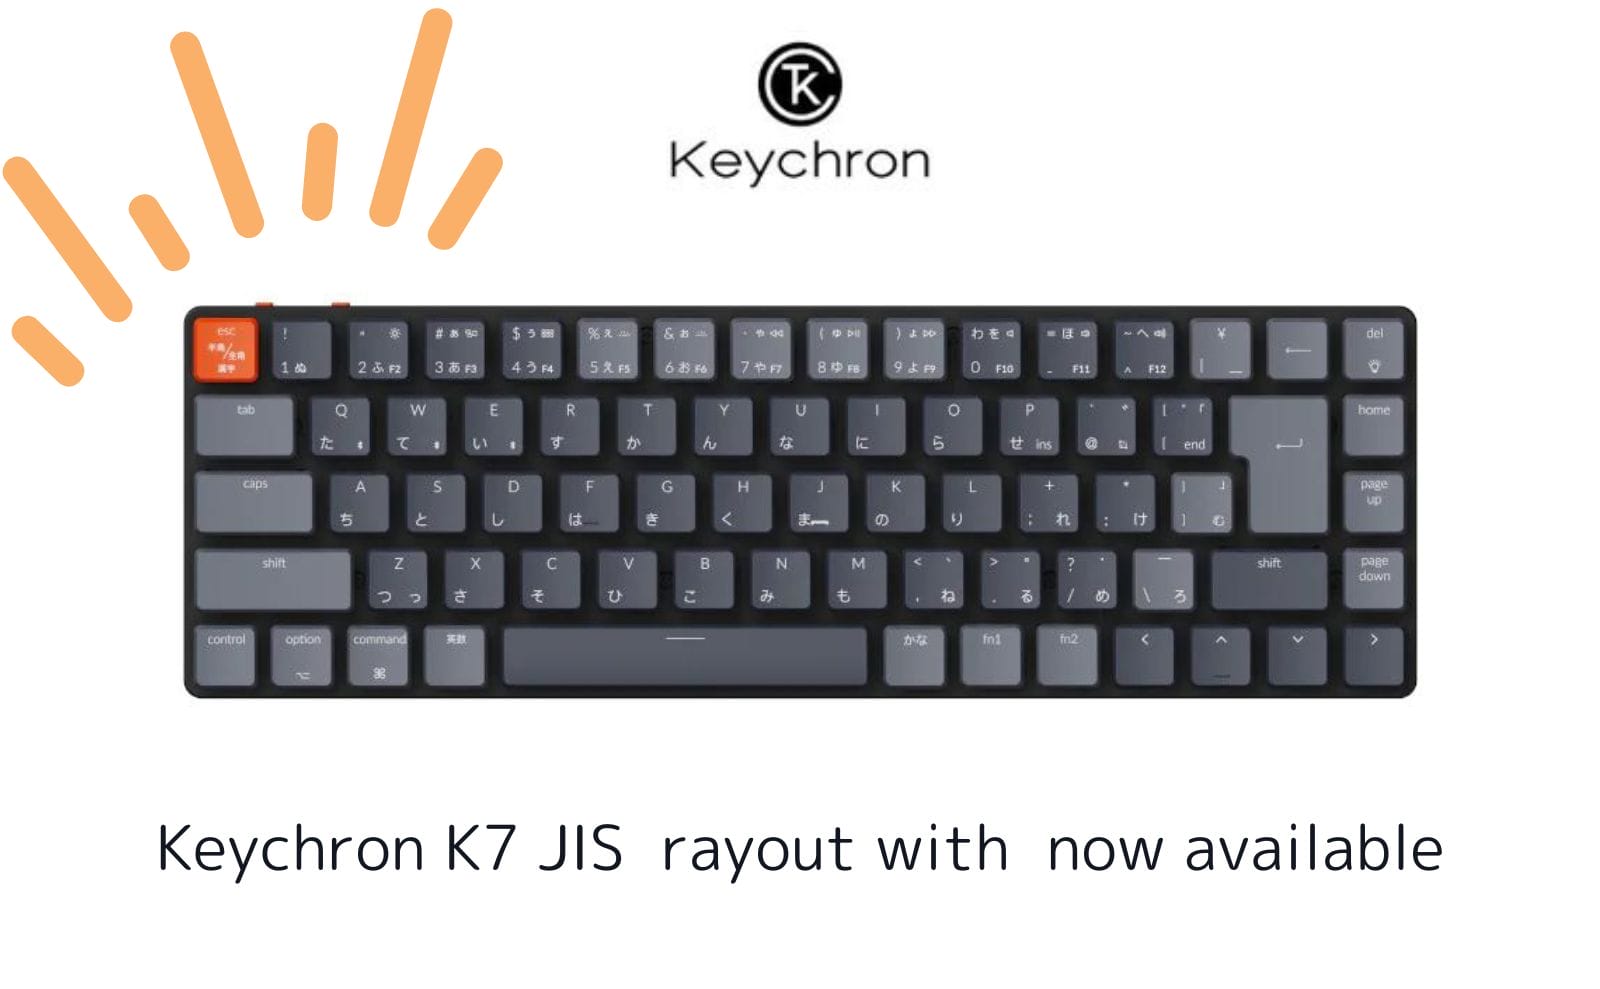 Keychron Q1 now available in 